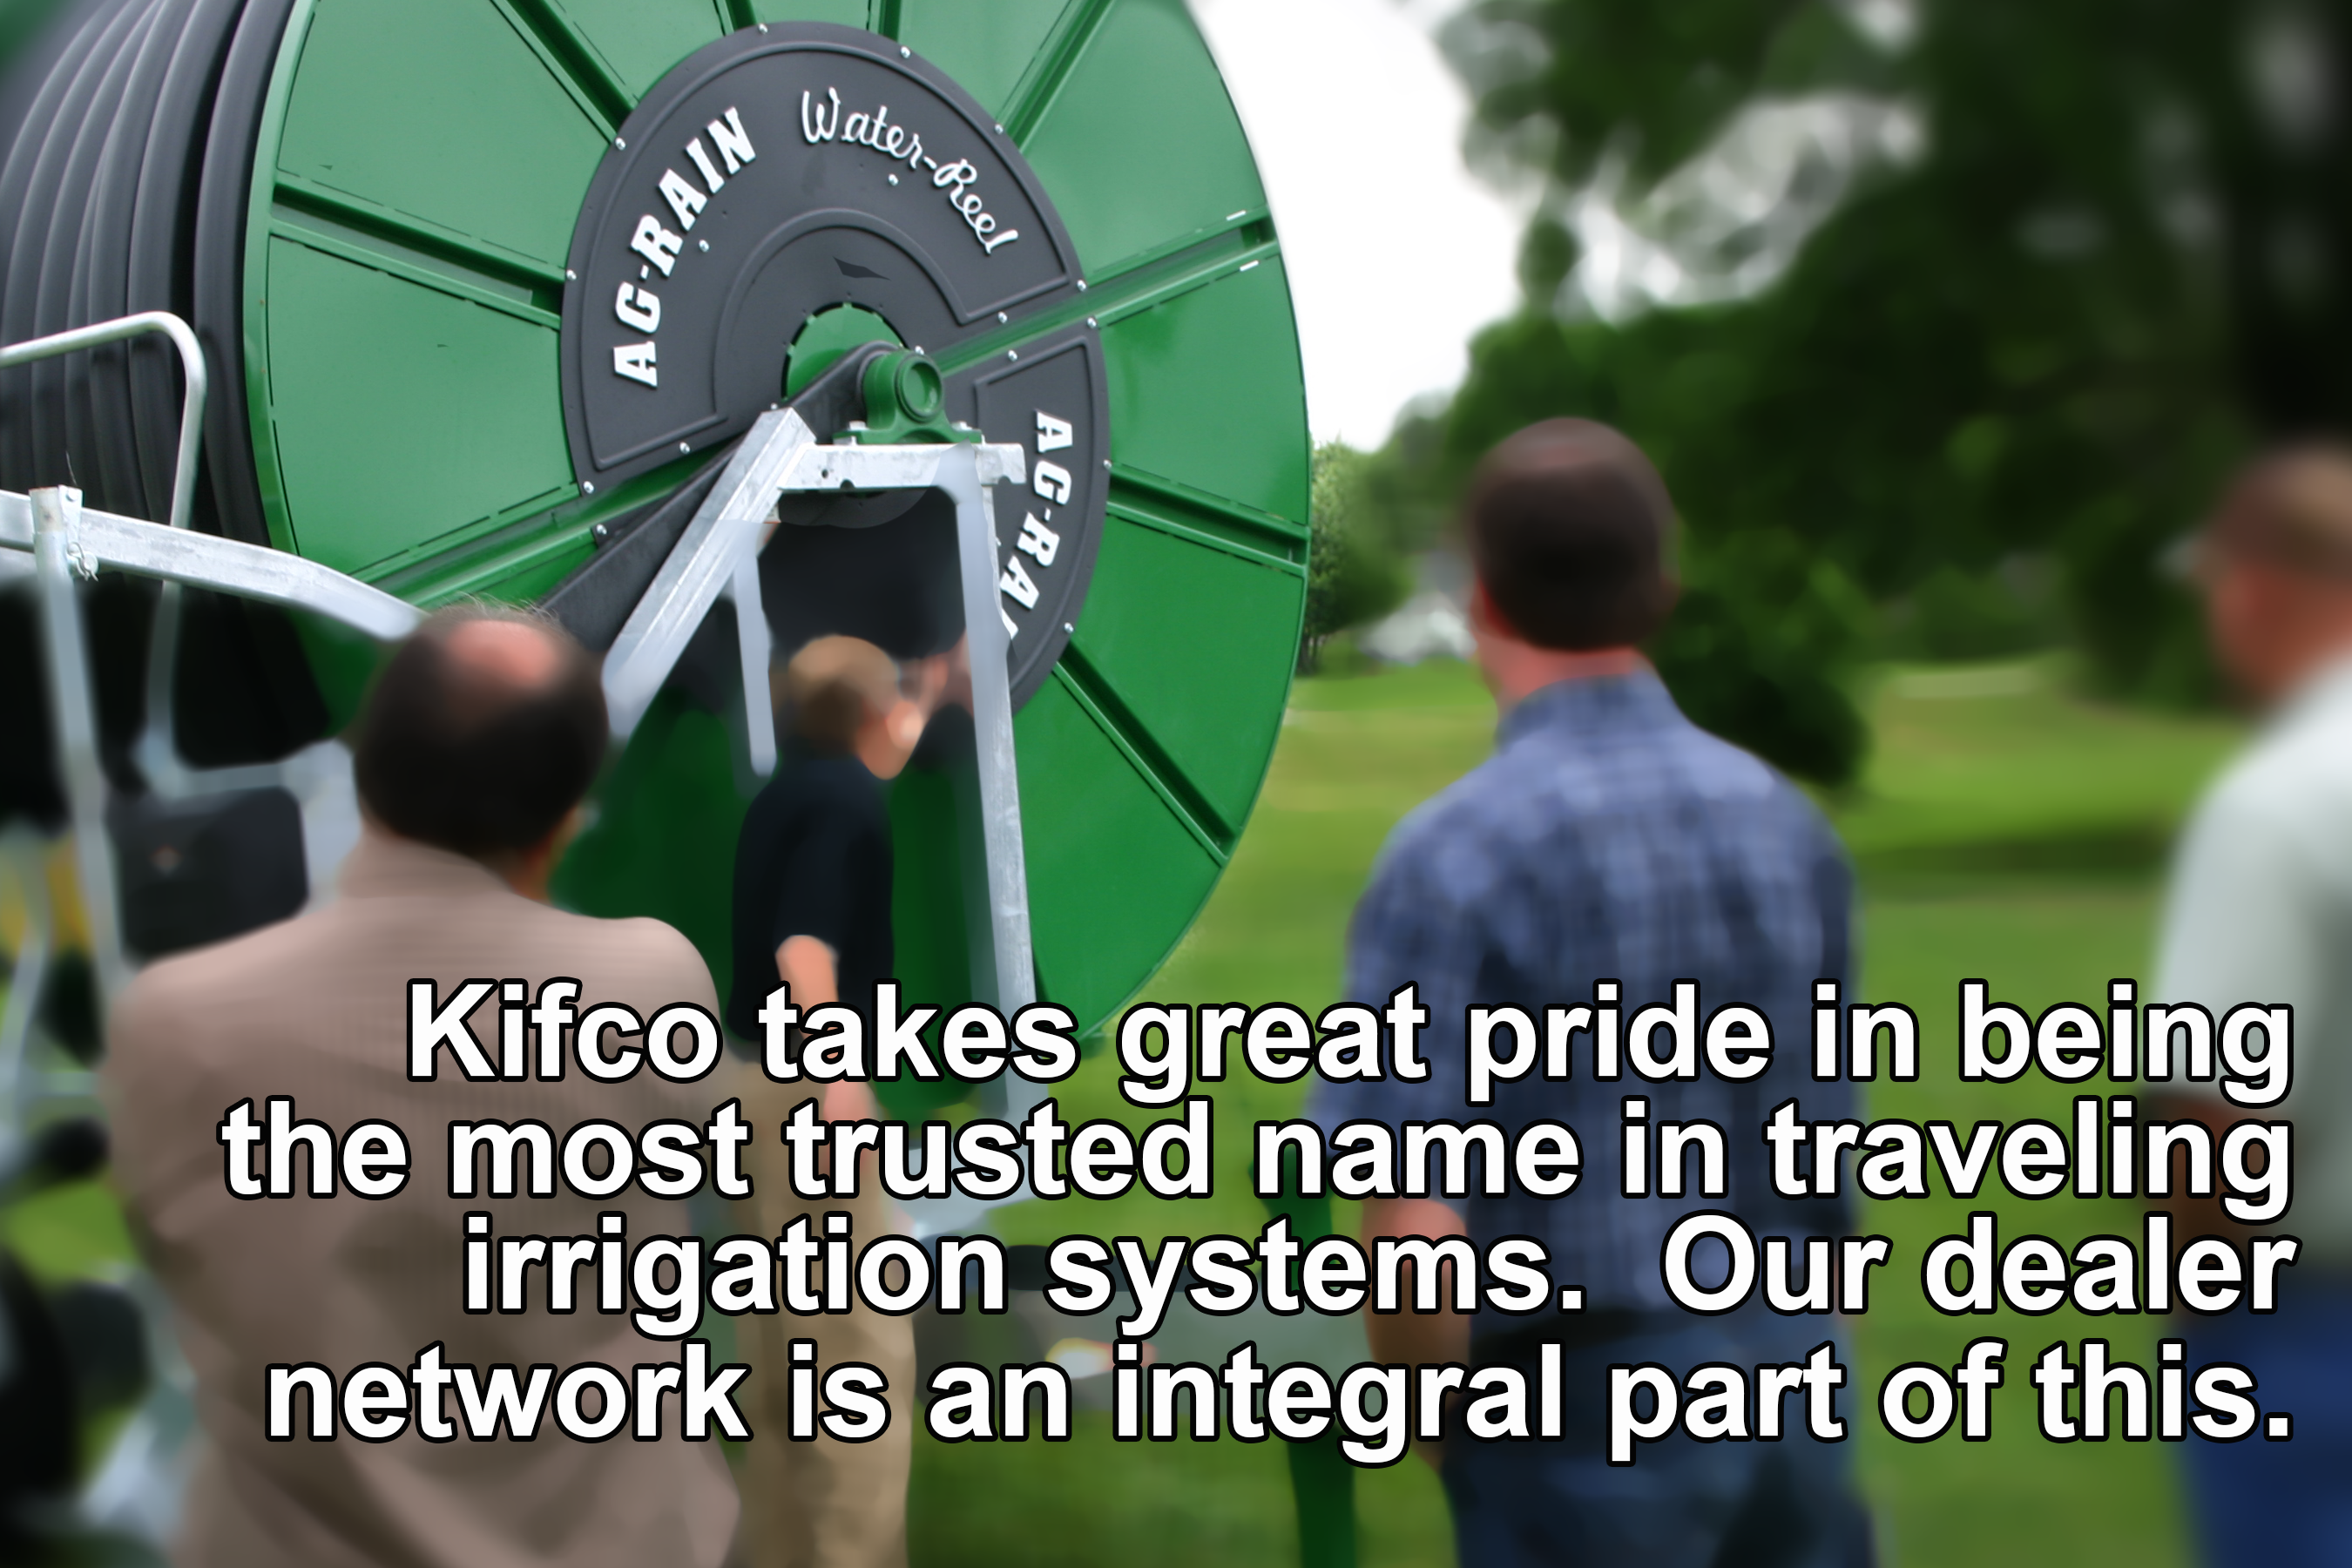 Kifco takes great pride in being the most trusted name in traveling irrigation systems. Our dealer network is an integral part of this.